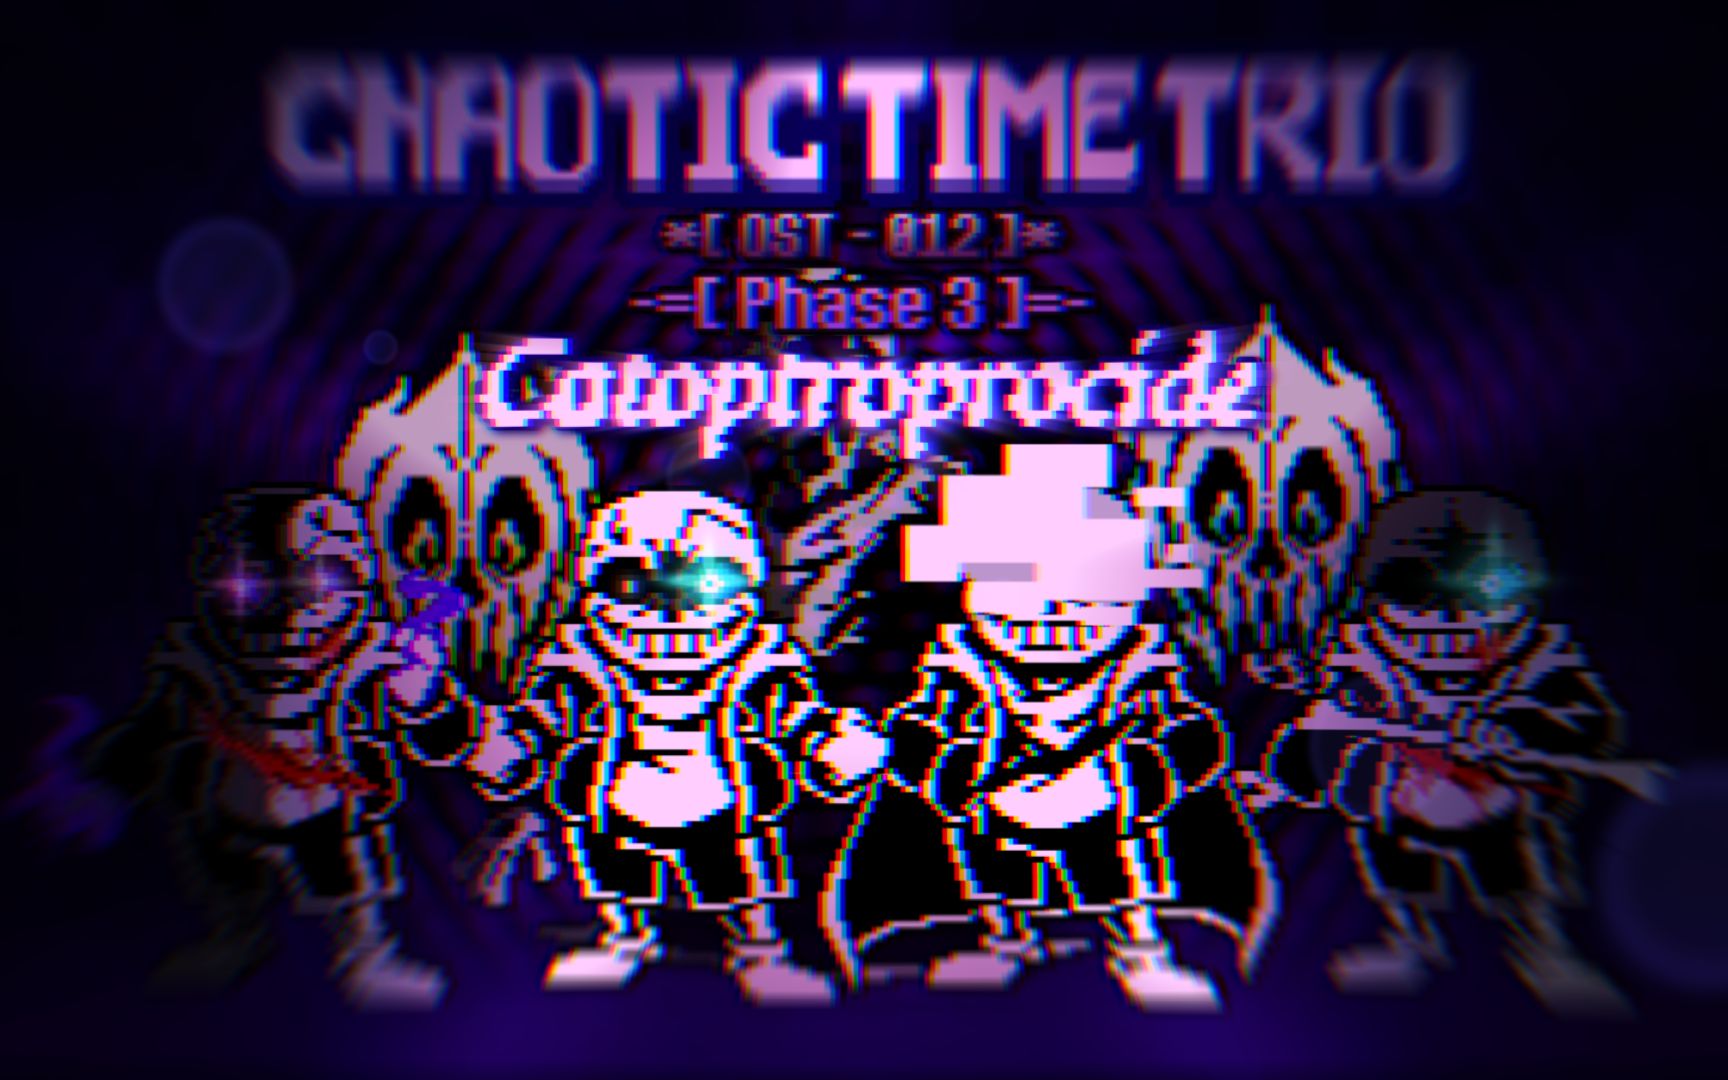 【Chaotic Time Trio】EII - OST-012 - Phase 3 - Catoptroprocide（昏镜覆辙）[+FLP]